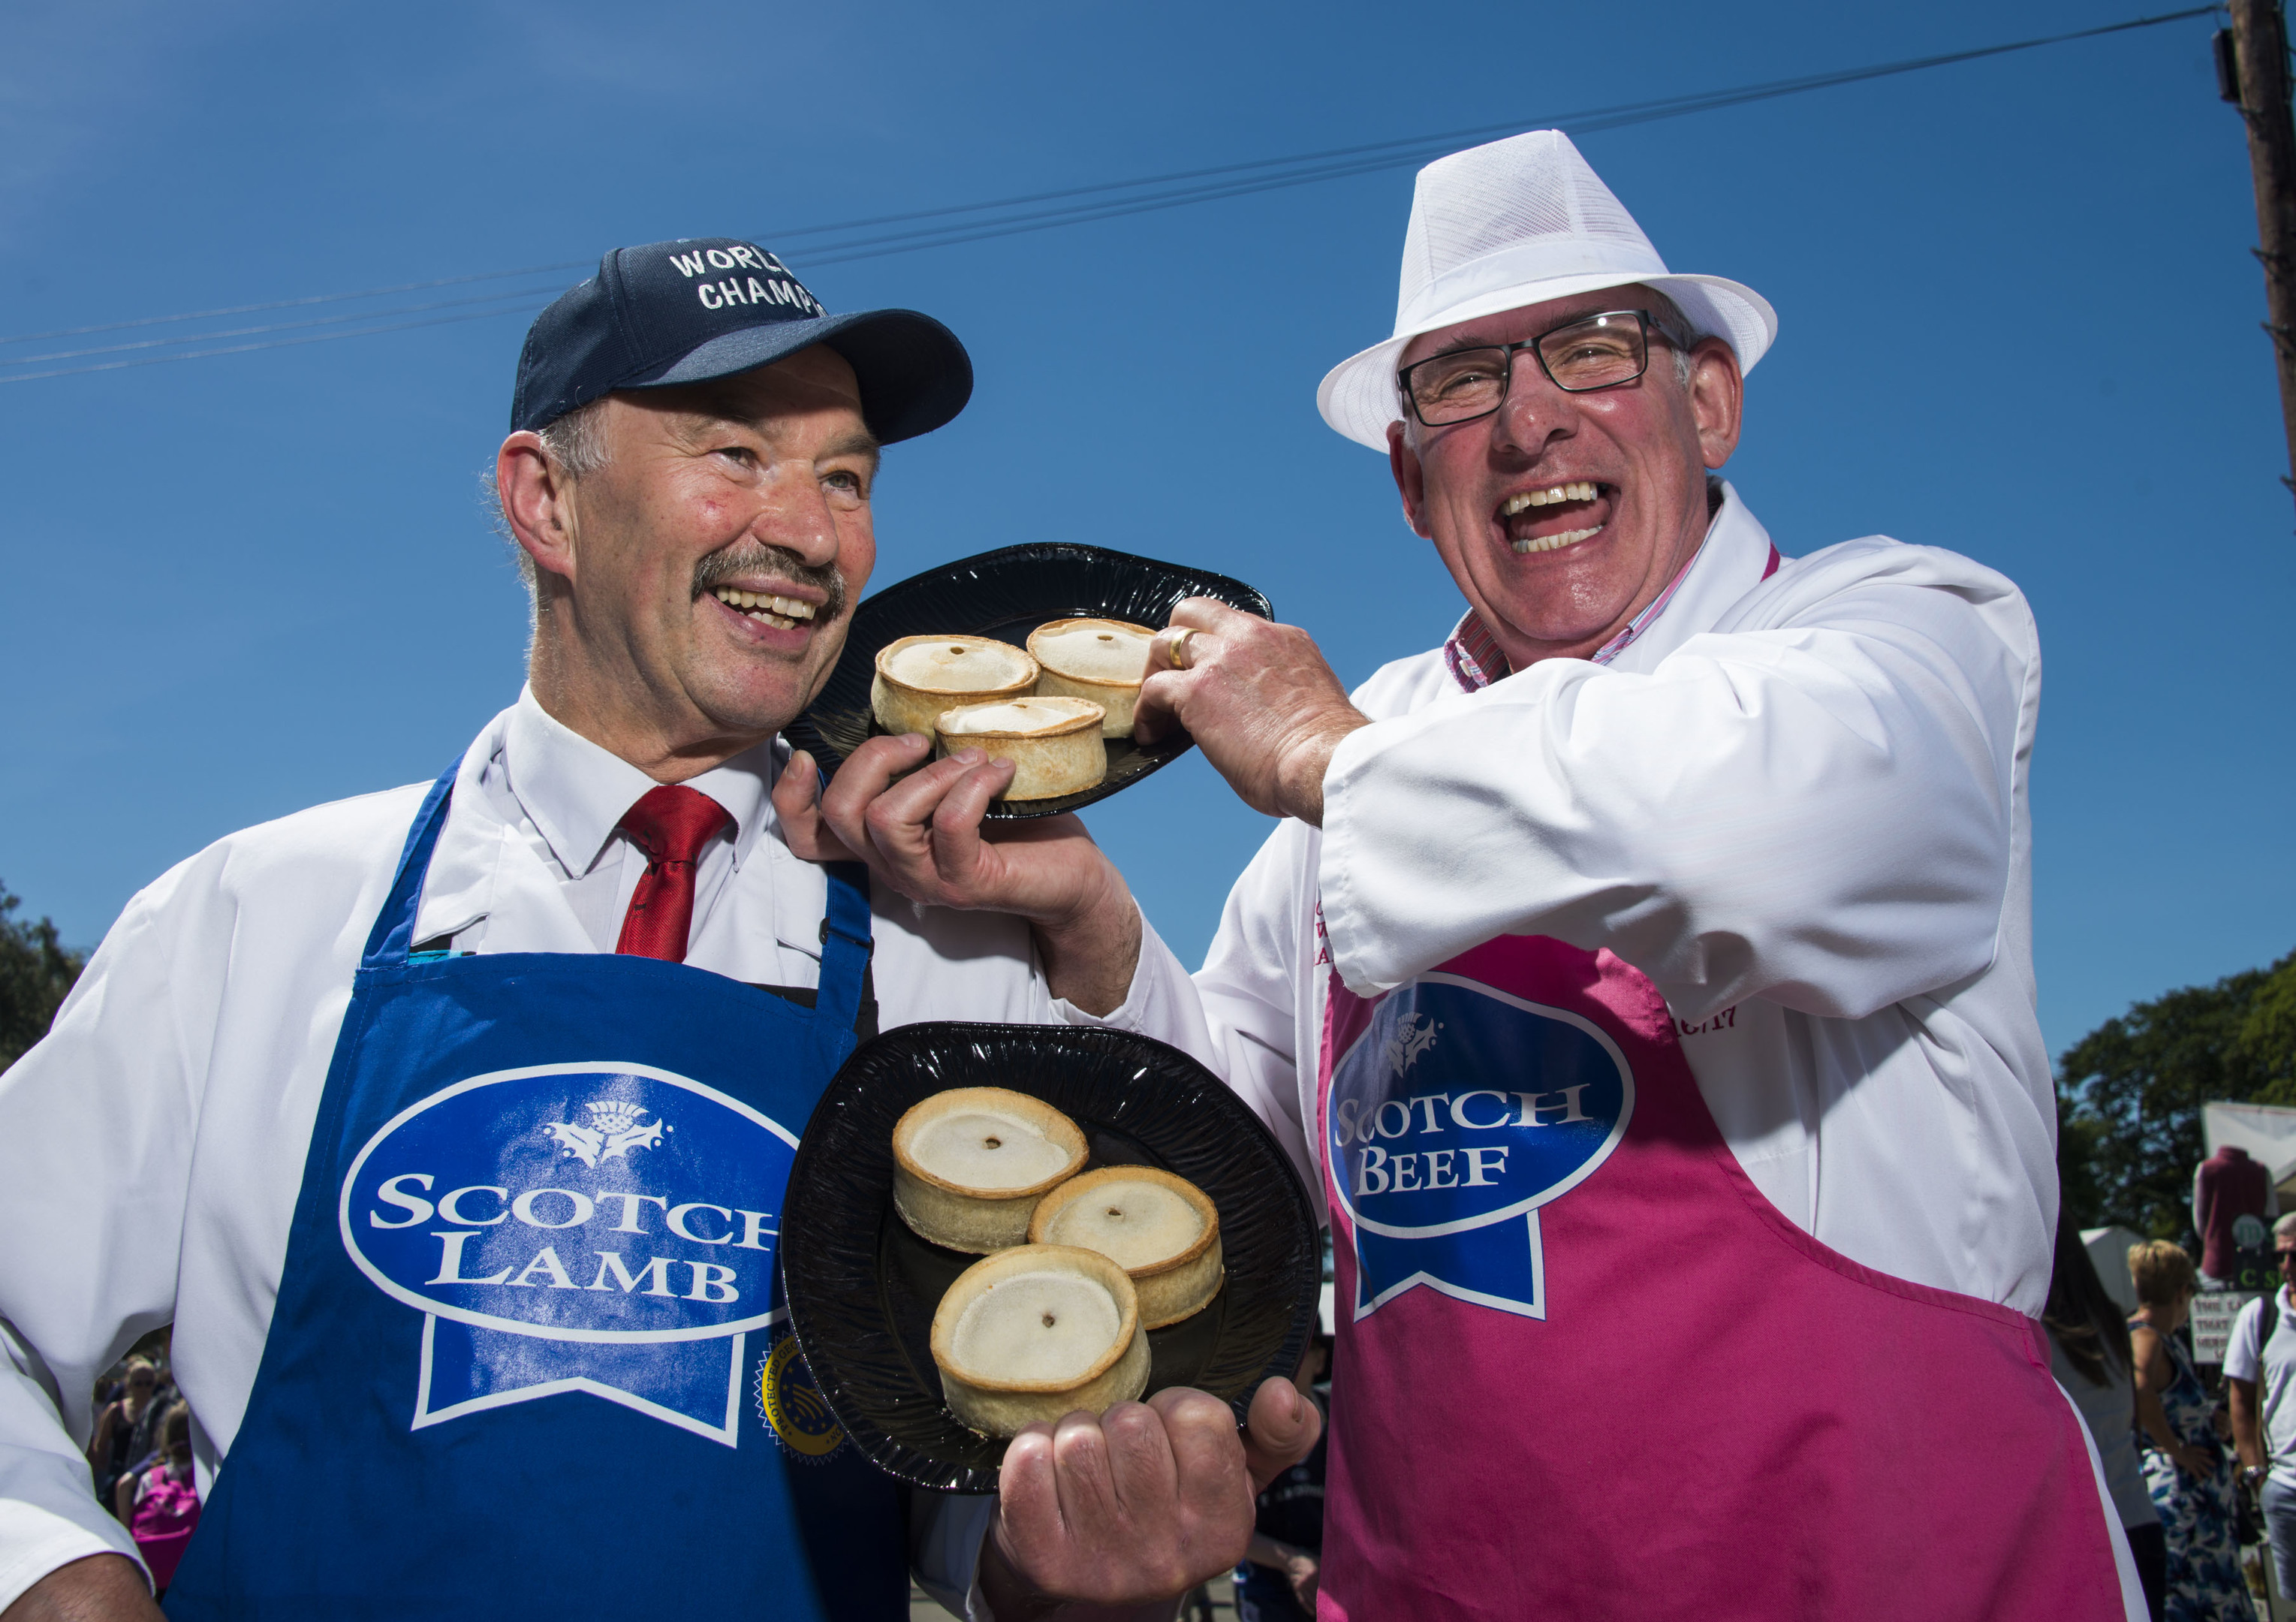 Alan Pirie (left) and Stephen McAllister faced each other in the pie-off